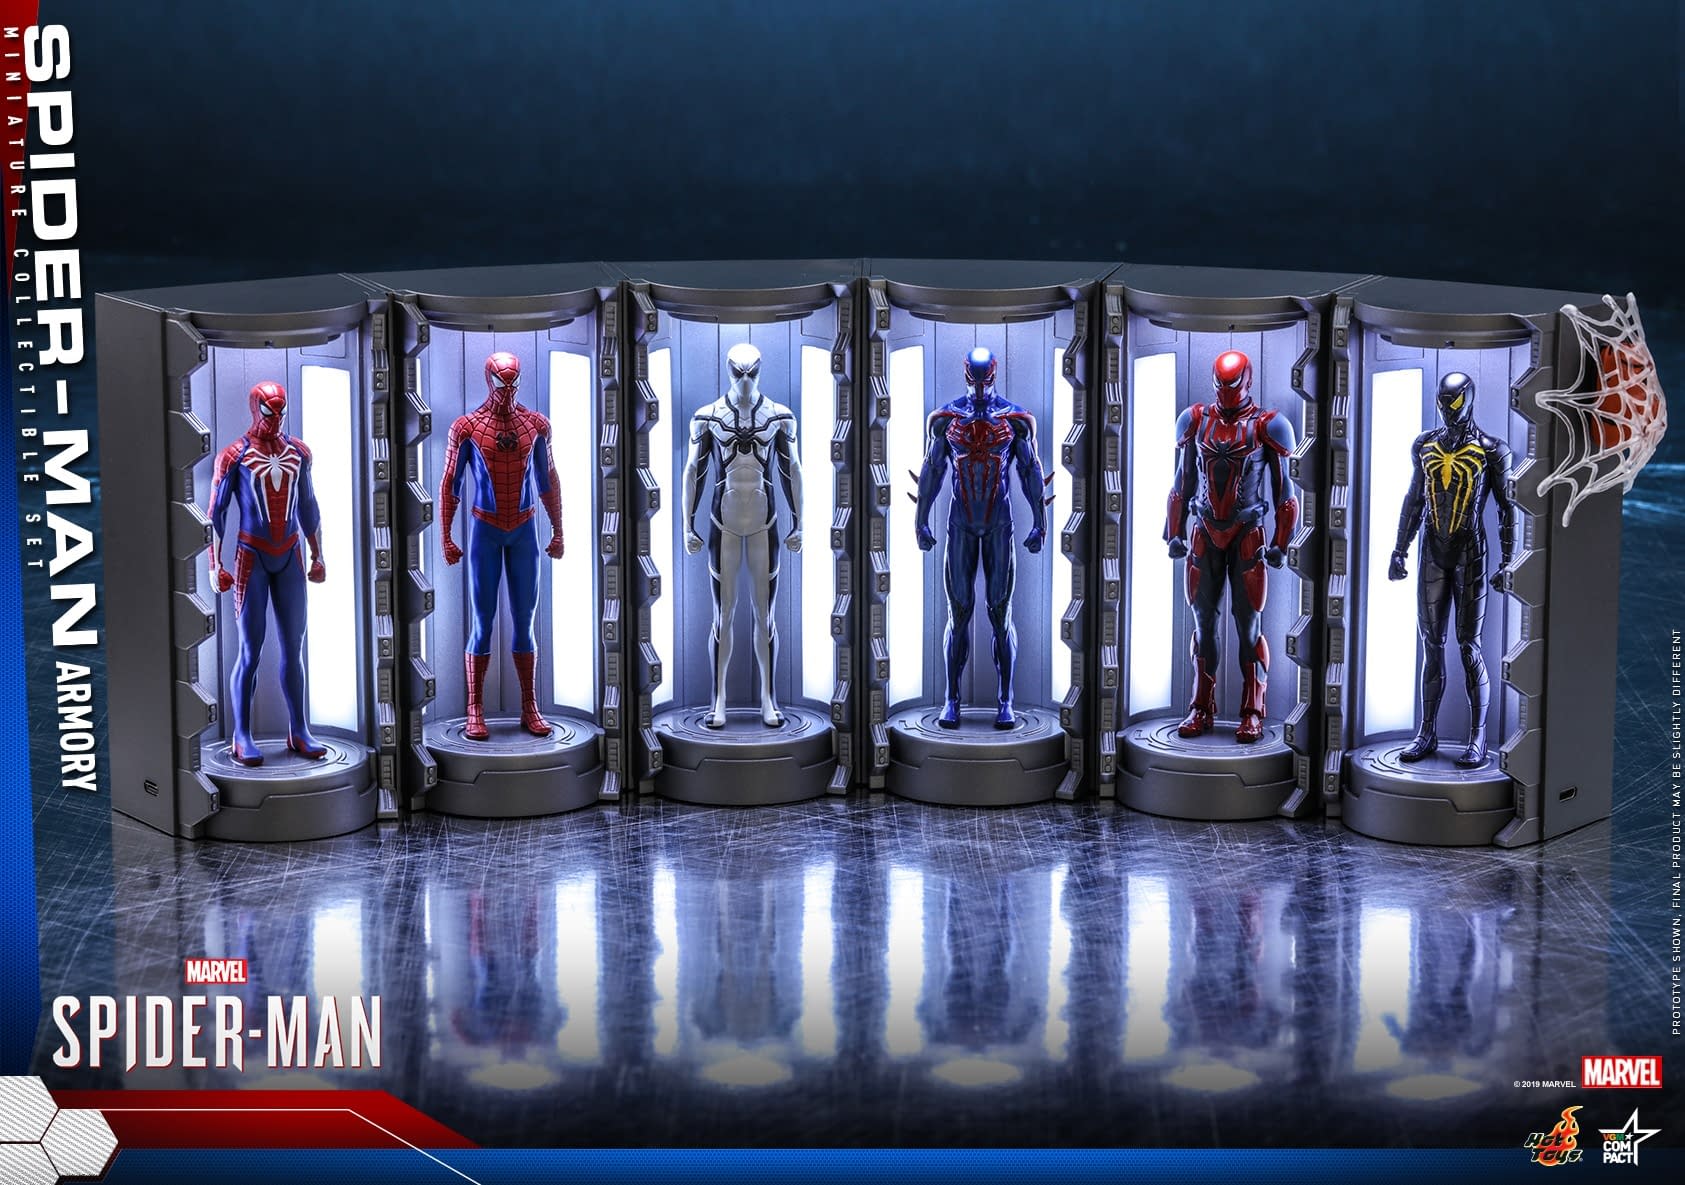 Spider-Man Gets His Own Armory Display with Hot Toys